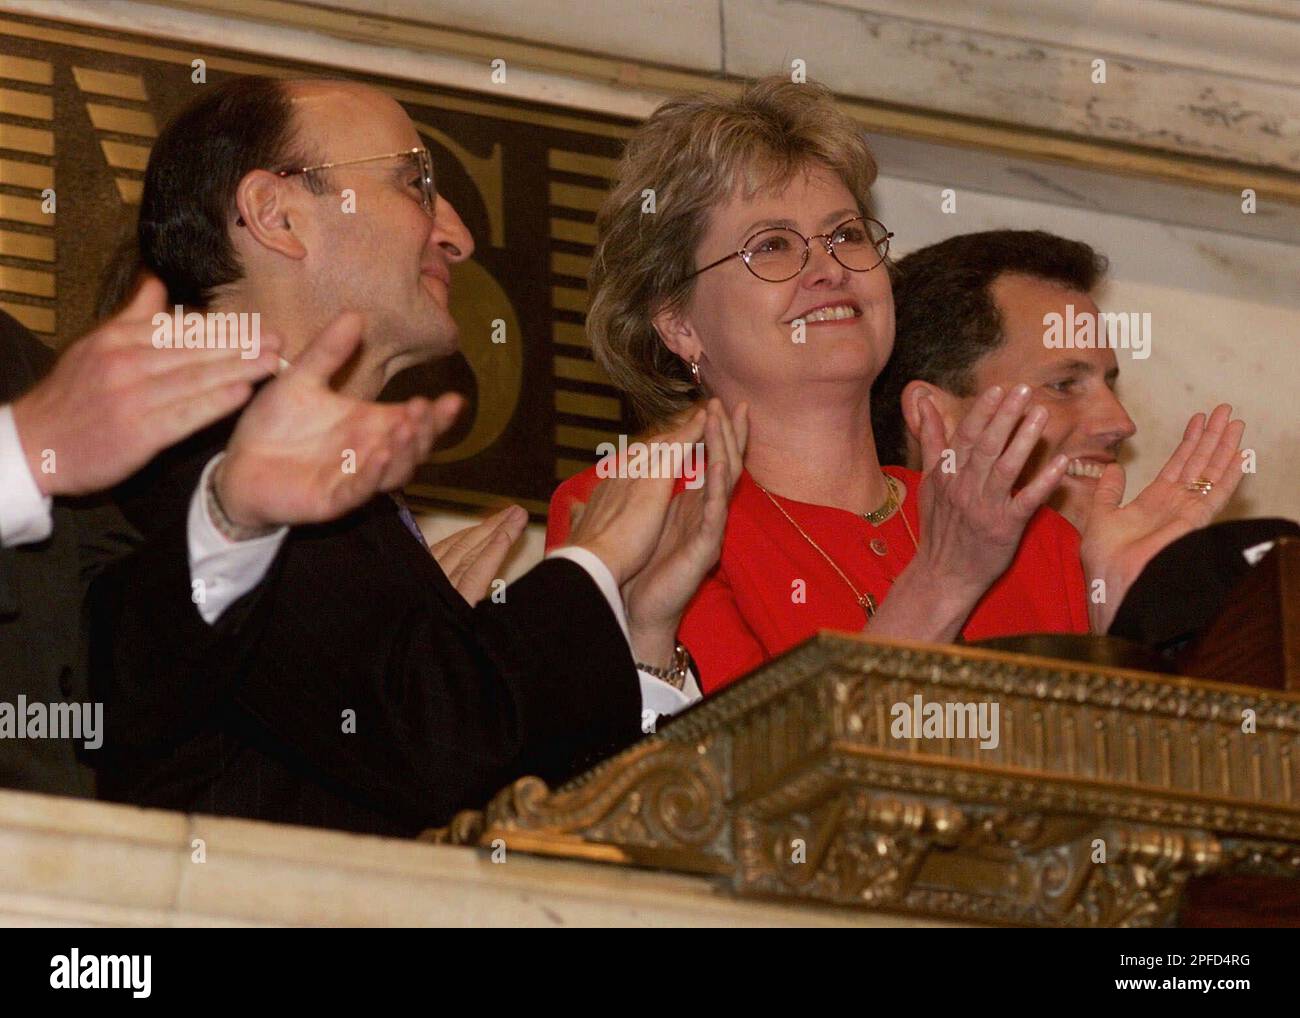 Katherine Hudson, president and CEO of Brady Corp., is joined in applause by New York Stock Excahnge Chairman Richard Grasso, left, after she rang the opening bell during listing ceremonies, Tuesday, May 18, 1999. The company, based in Milwaukee, Wis., manufactures identification systems, tapes and components for adhesion. They do business in 18 countries and operate 16 manufacturing facilities worldwide. (AP Photo/Richard Drew) Stock Photo